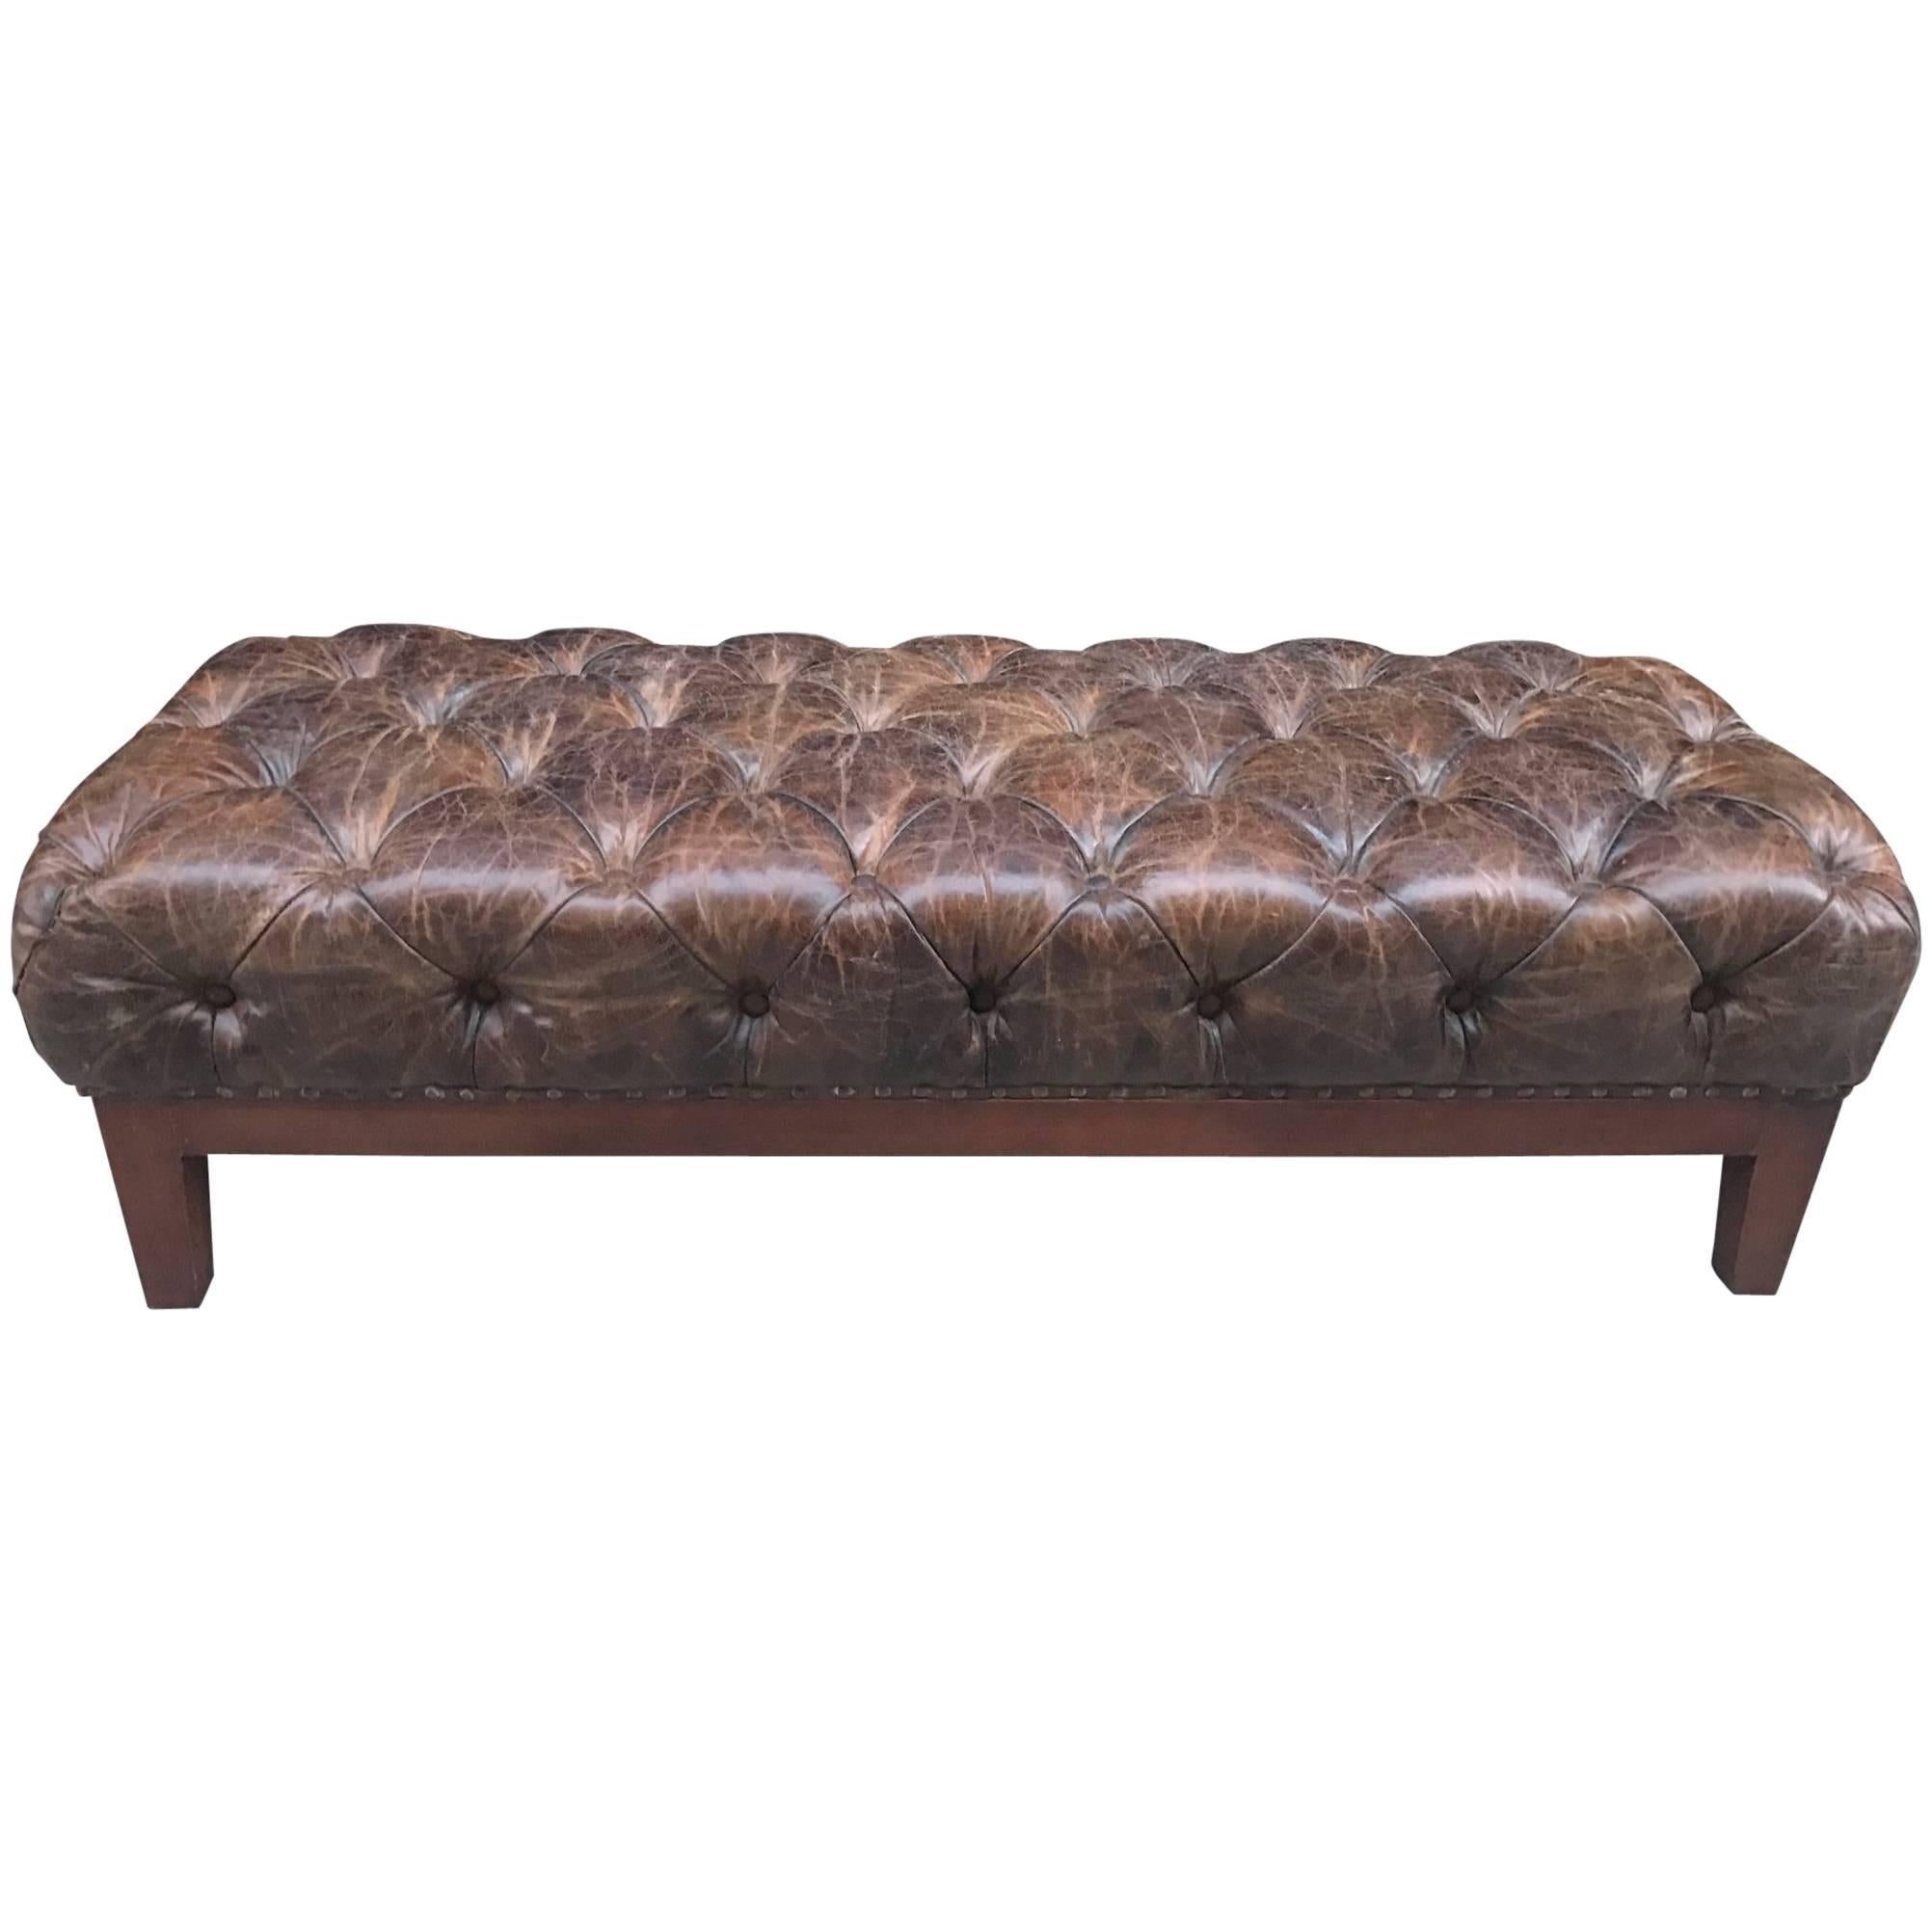 Brown Distressed Tufted Leather Bench